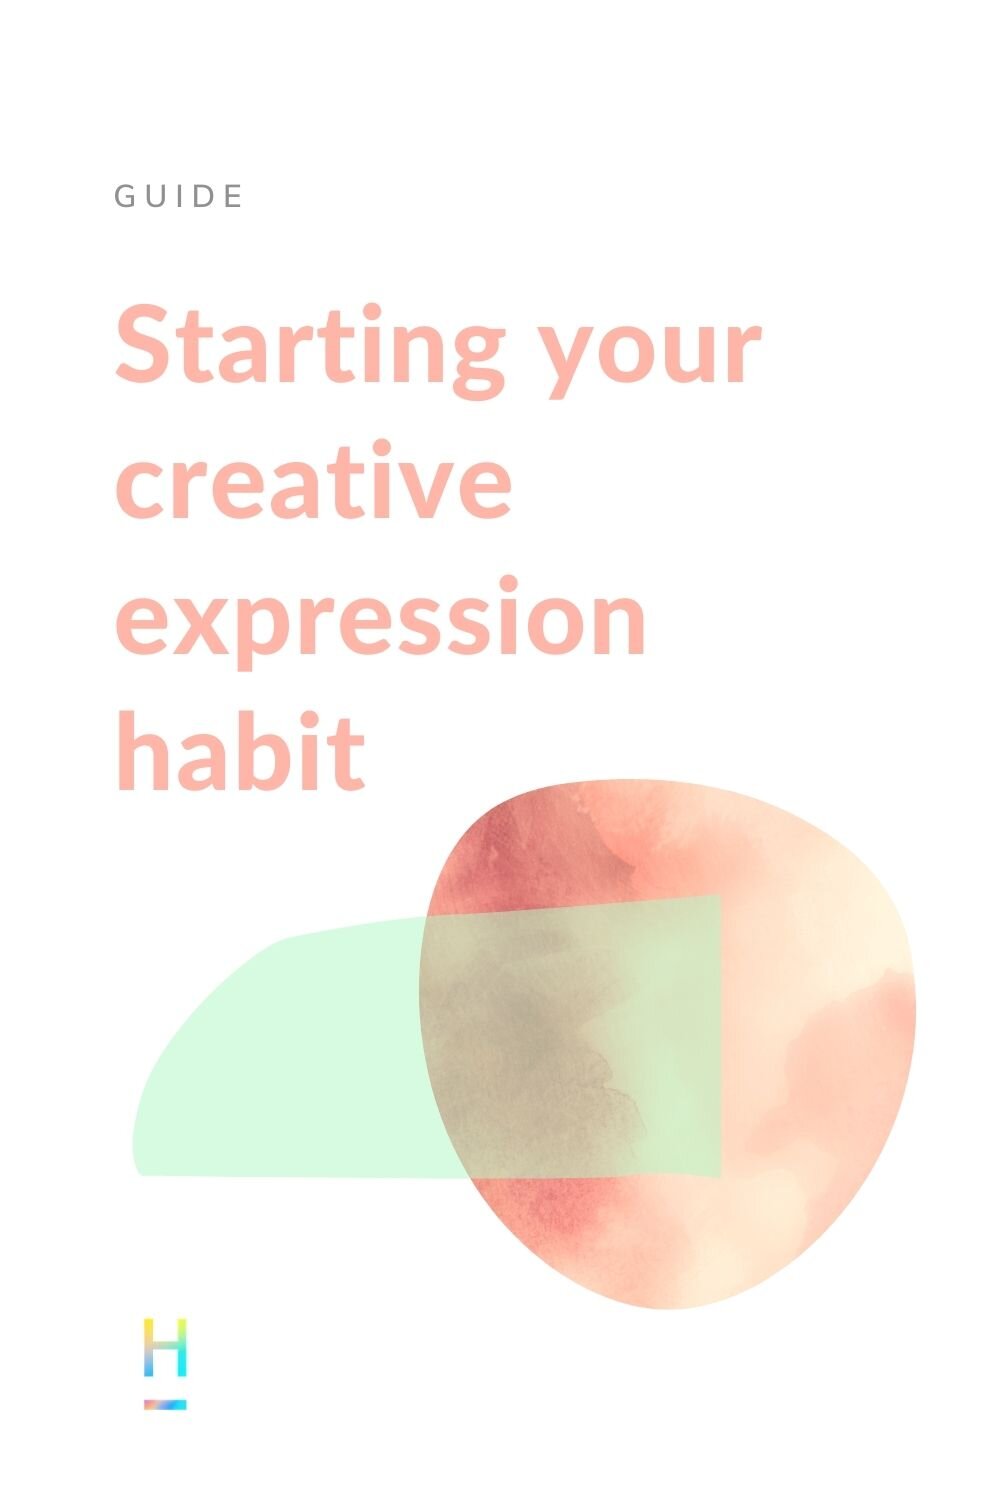 Starting your creative expression habit (Copy)